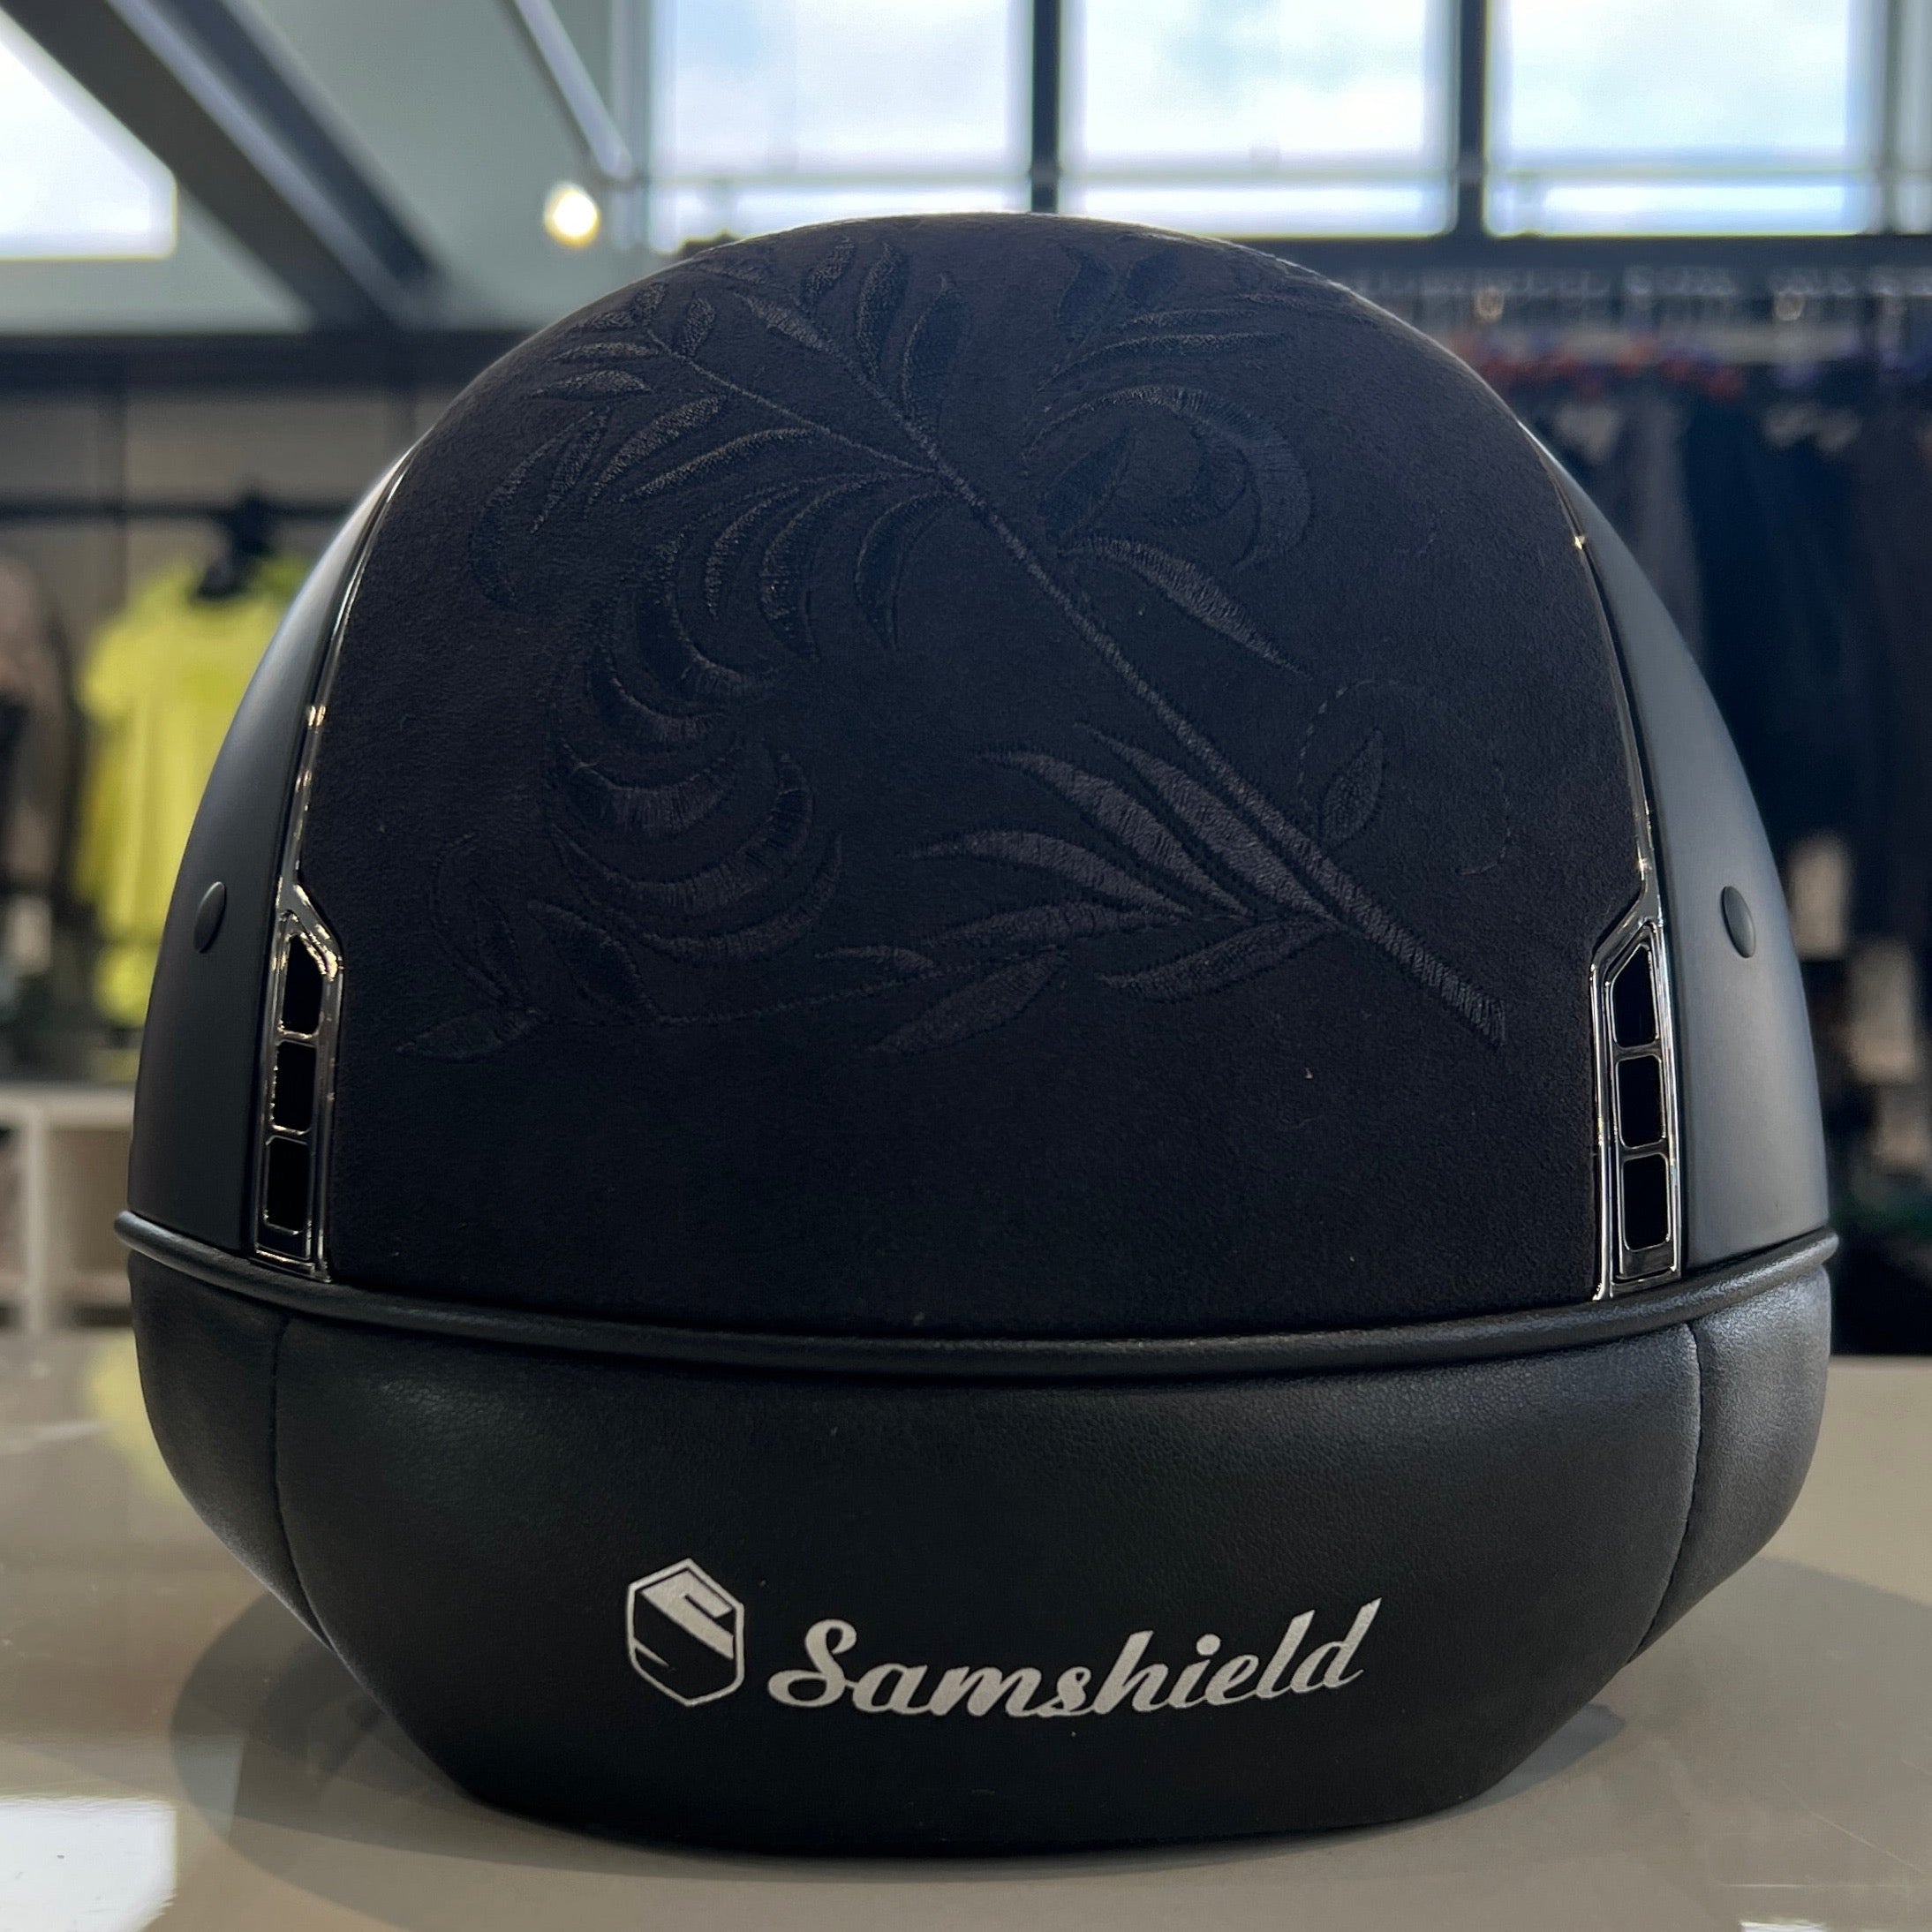 Samshield Shadowmatt 1.0 Black flower embroidery- in stock and ready to ship!